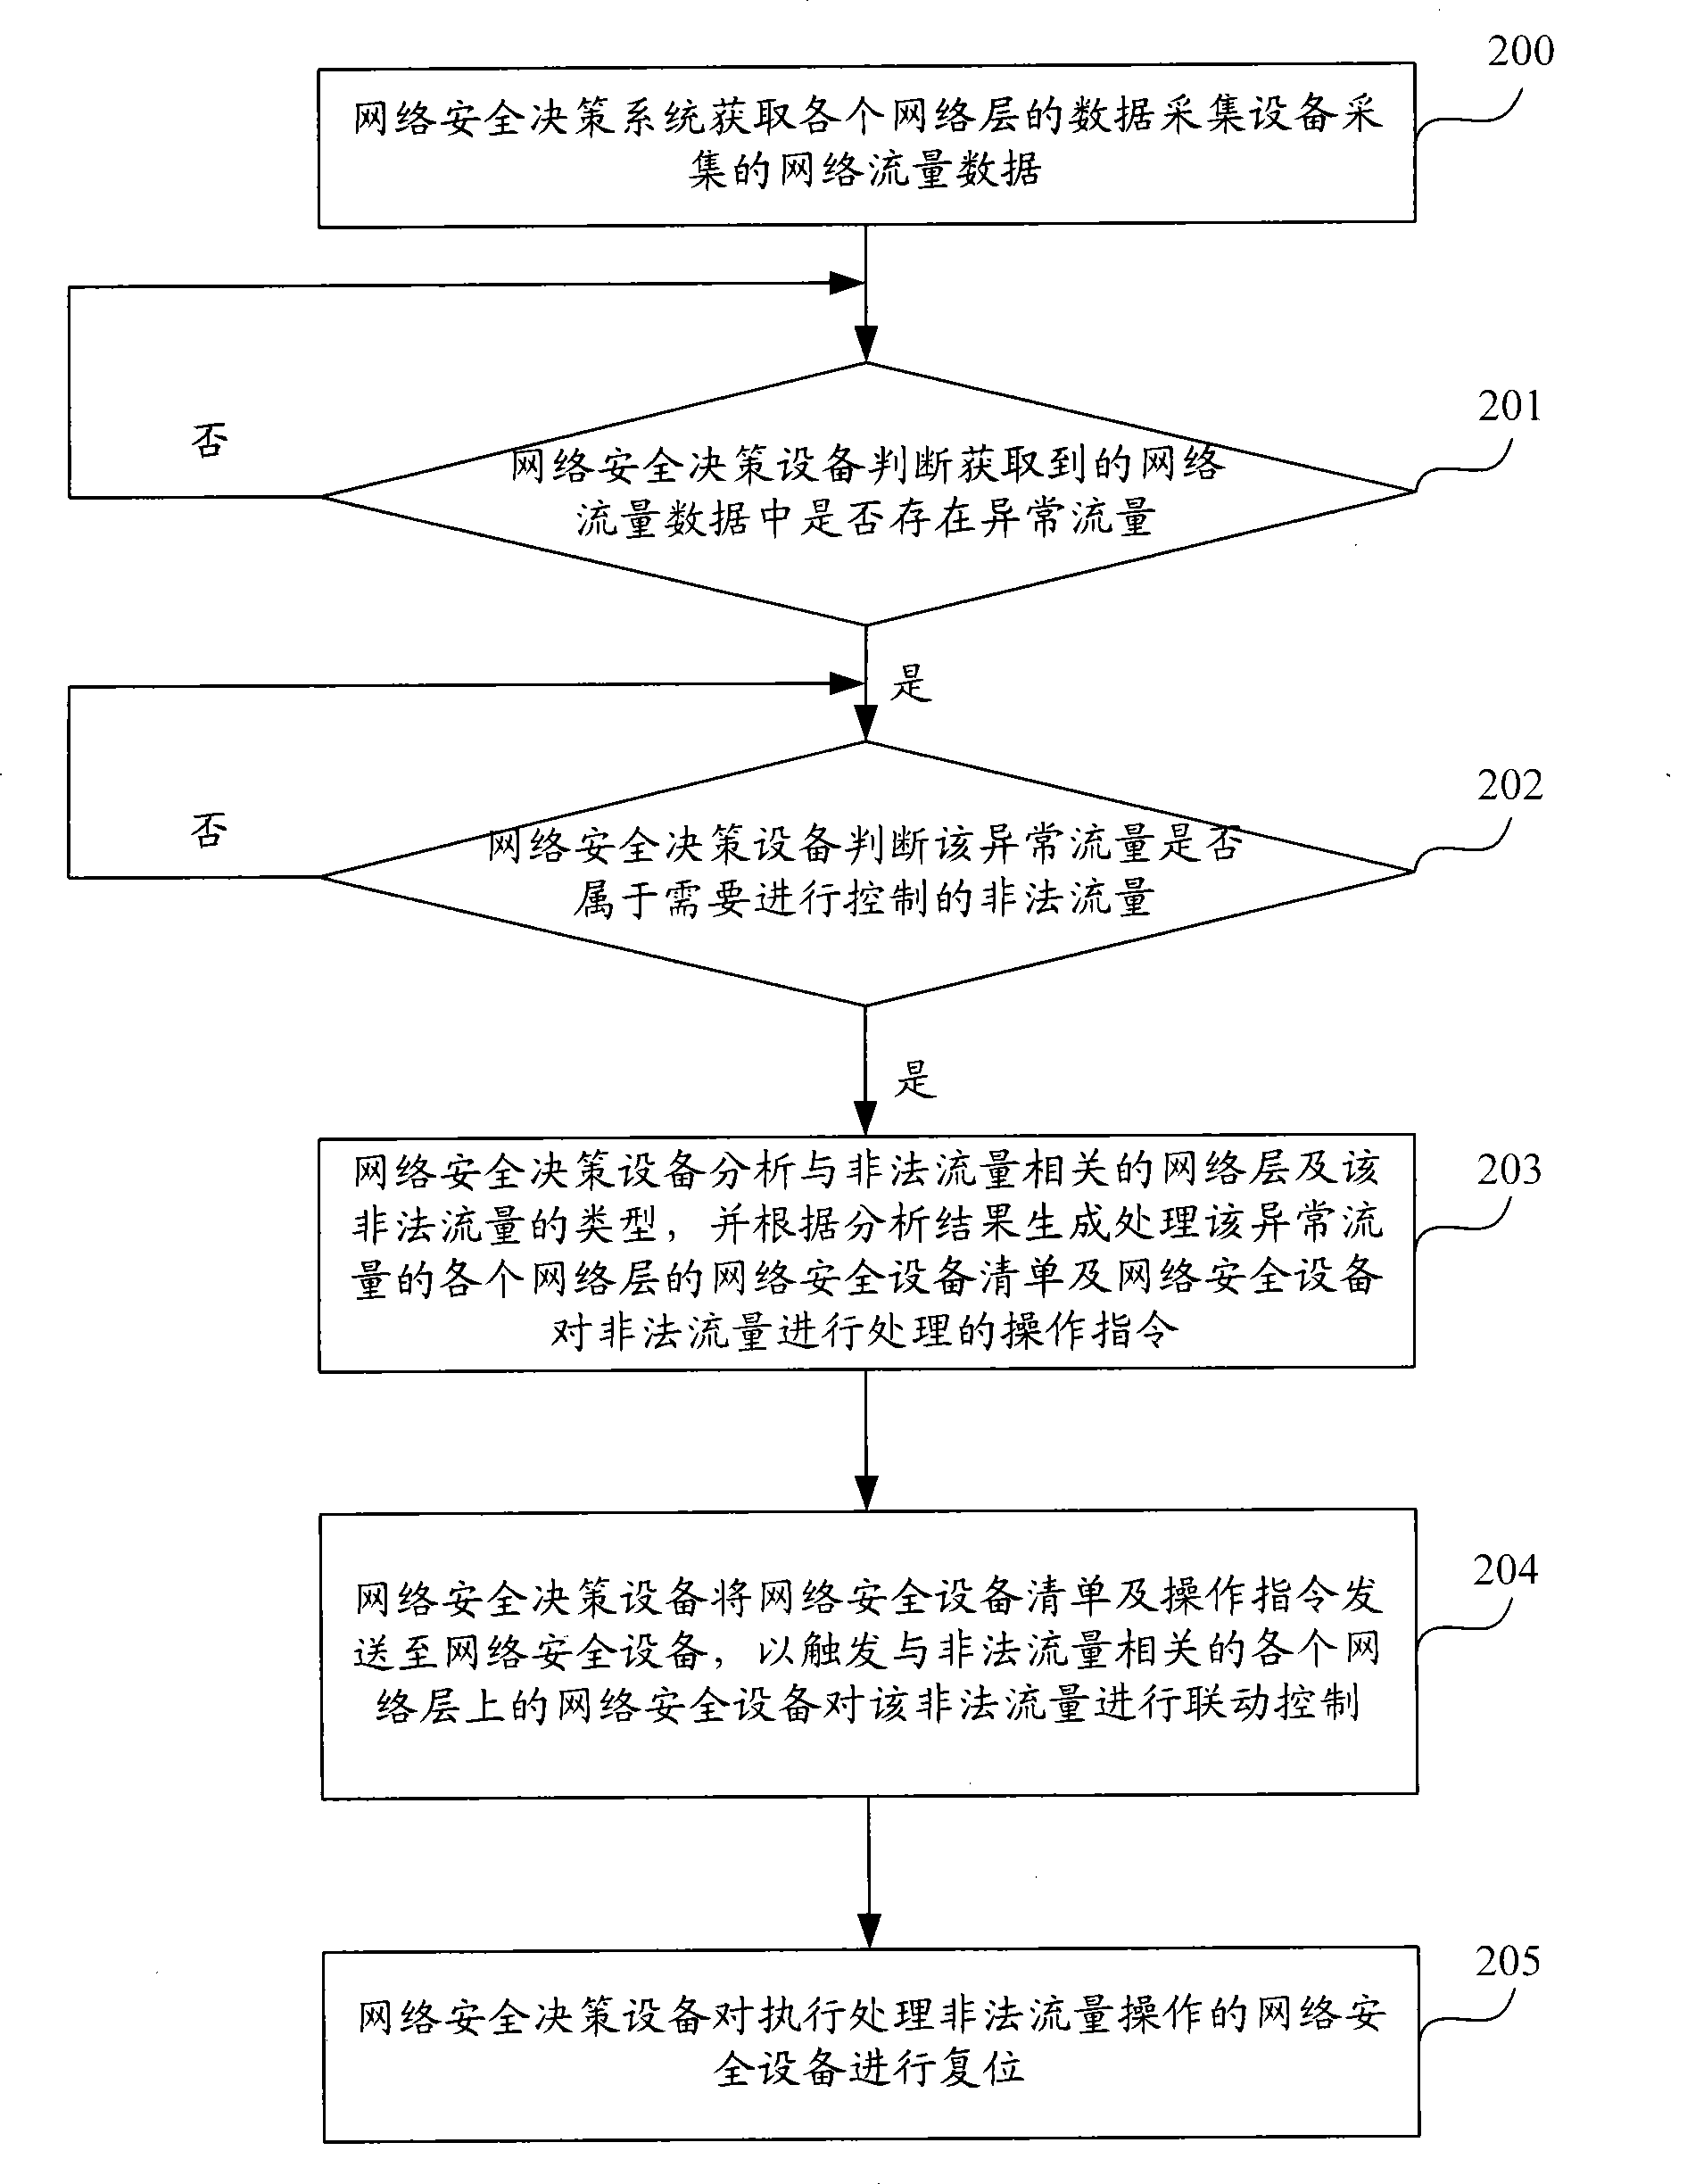 Flow linkage control method, apparatus and system